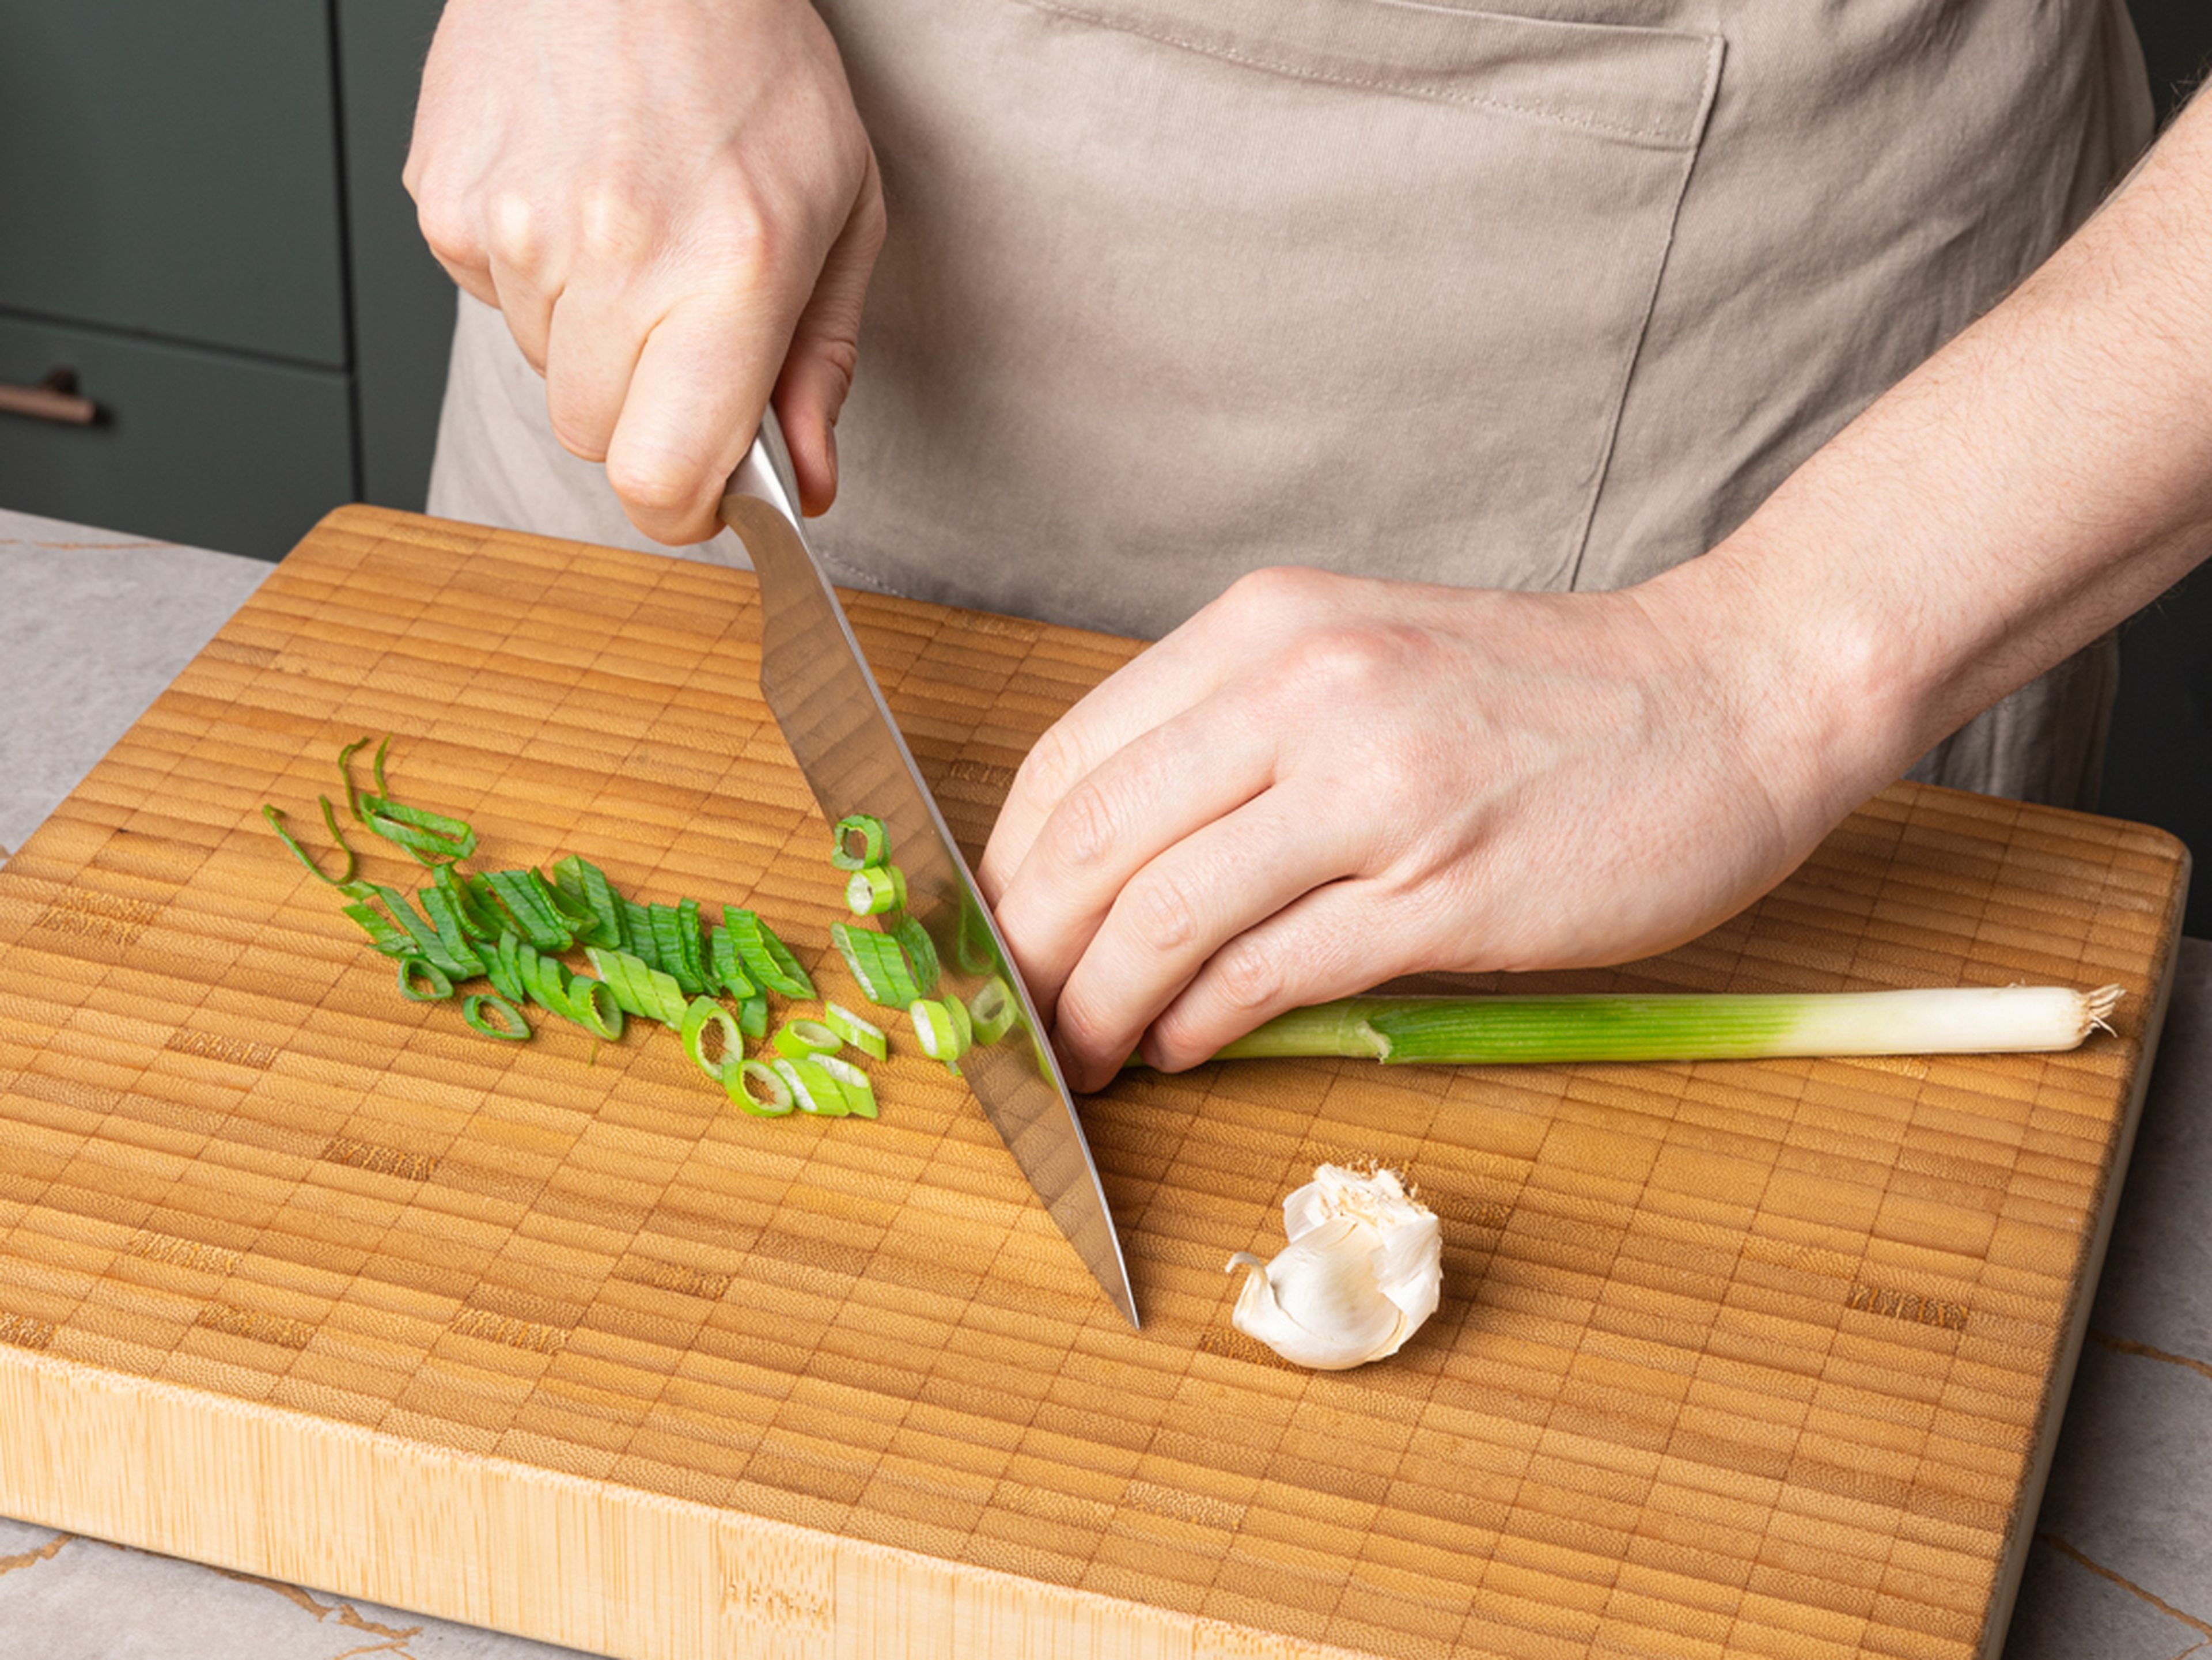 Preheat the oven to 220°C/428°F top/bottom heat (200°C/392°F convection oven). Finely chop the garlic. Separate the white and green parts of the spring onion and cut them into fine rings.